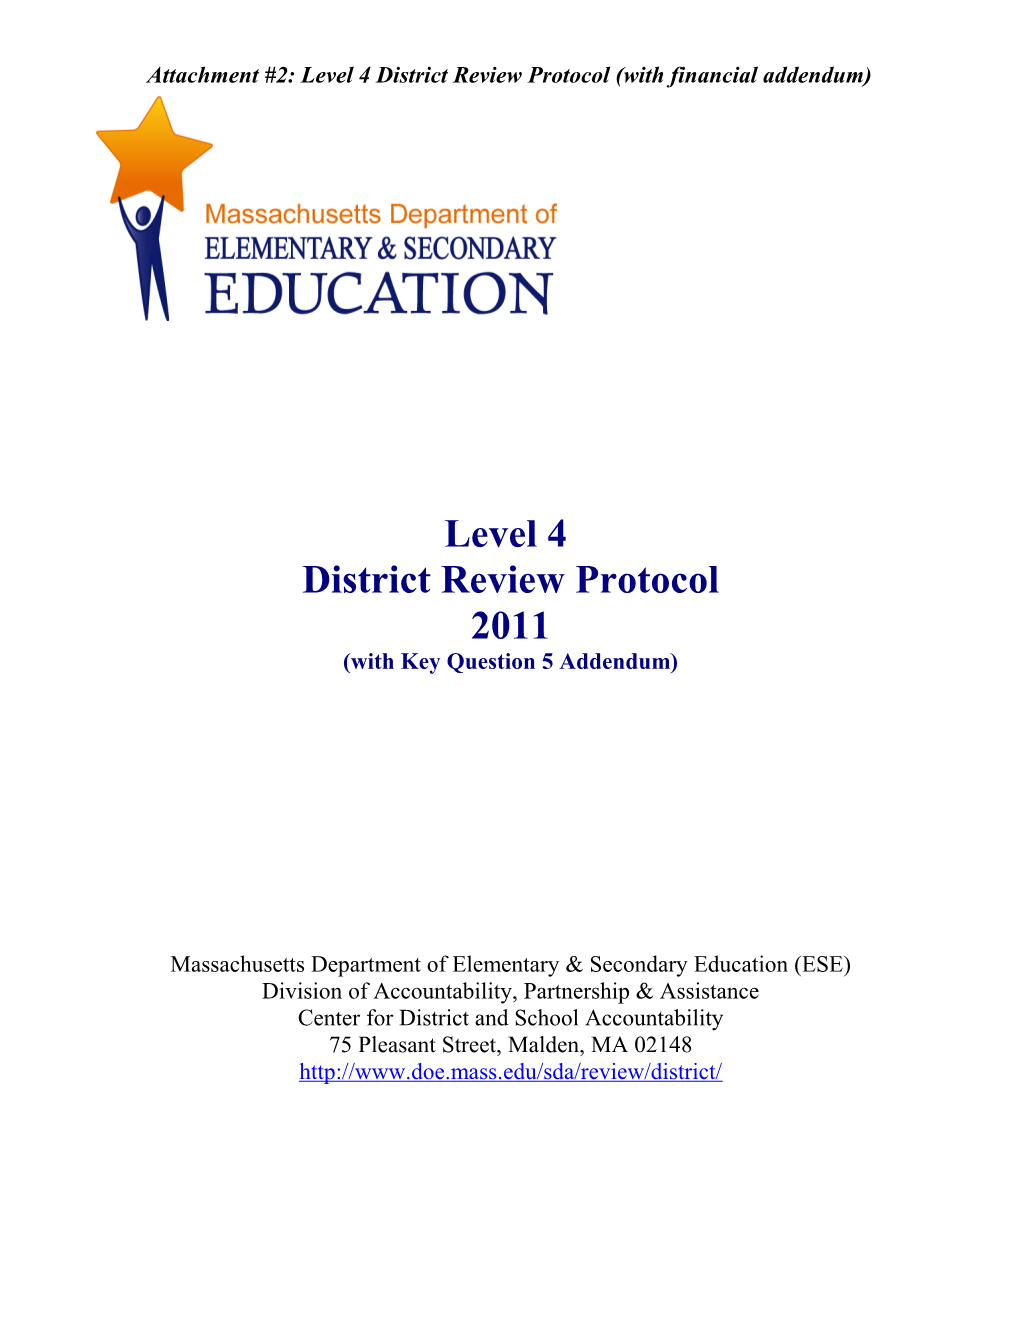 Attachment #2: 2010-11 Level 4 Review Protocol (With Key Question 5 Addendum), March 2011